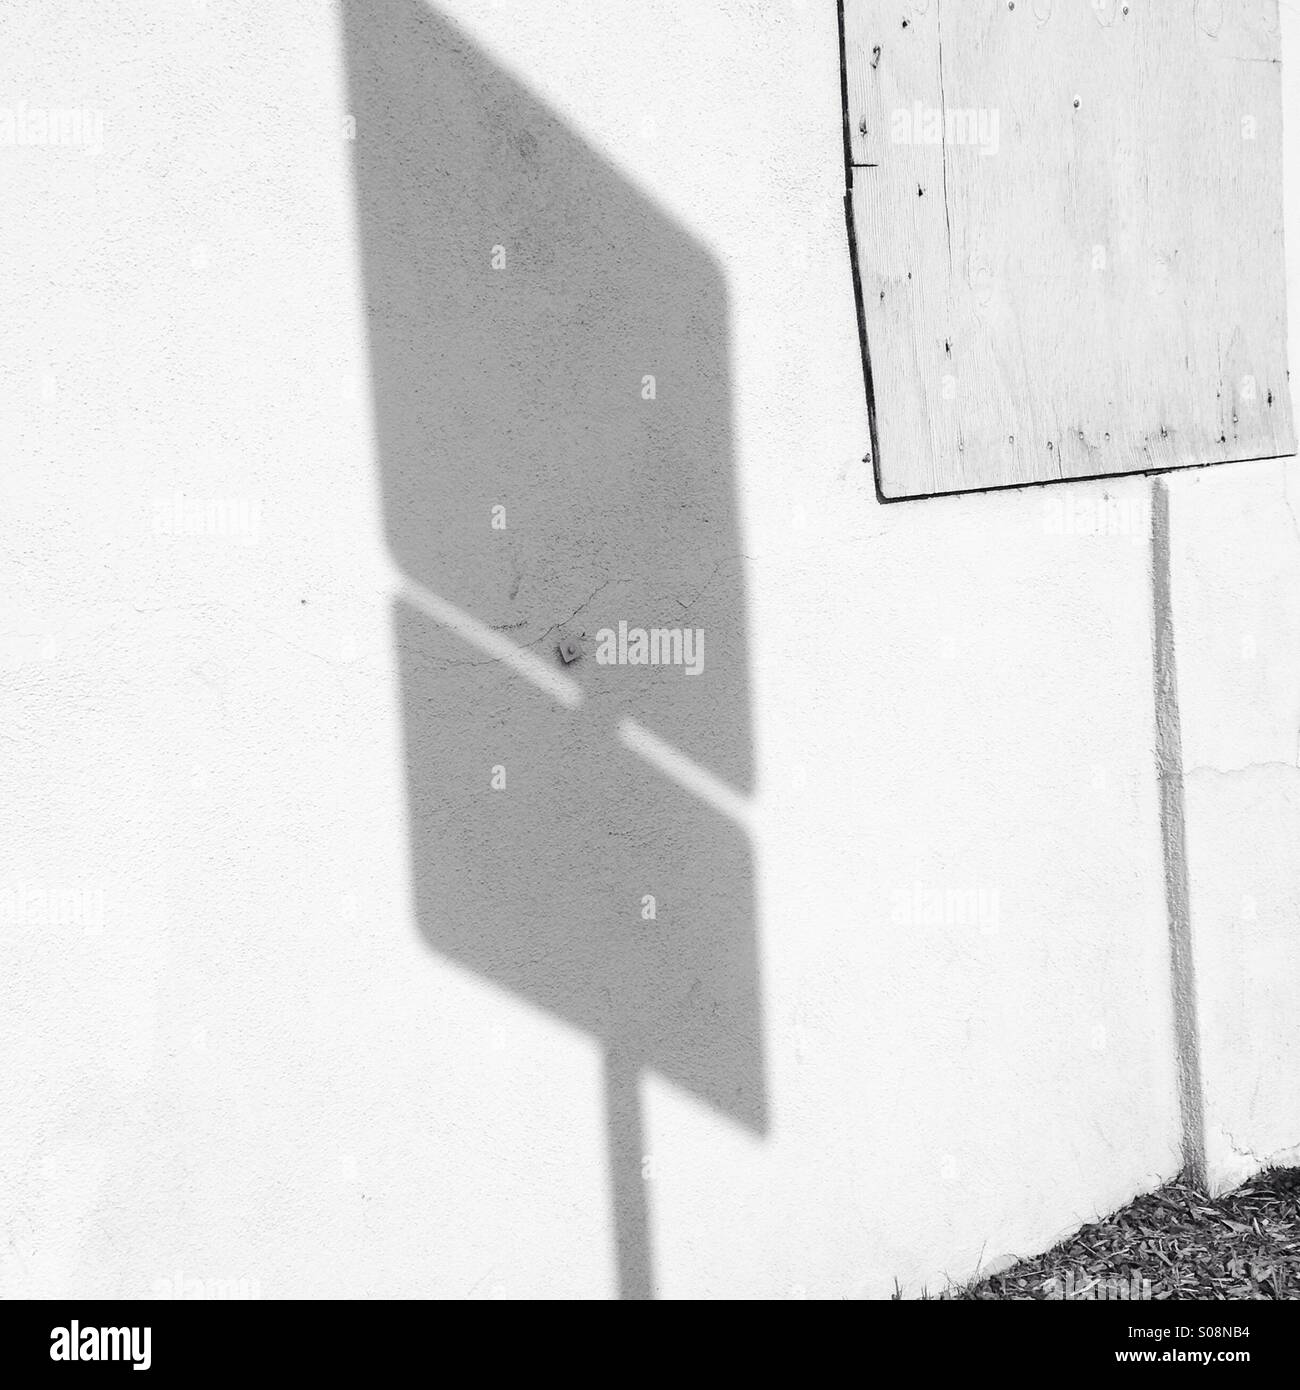 Street sign shadow on patched building wall Stock Photo